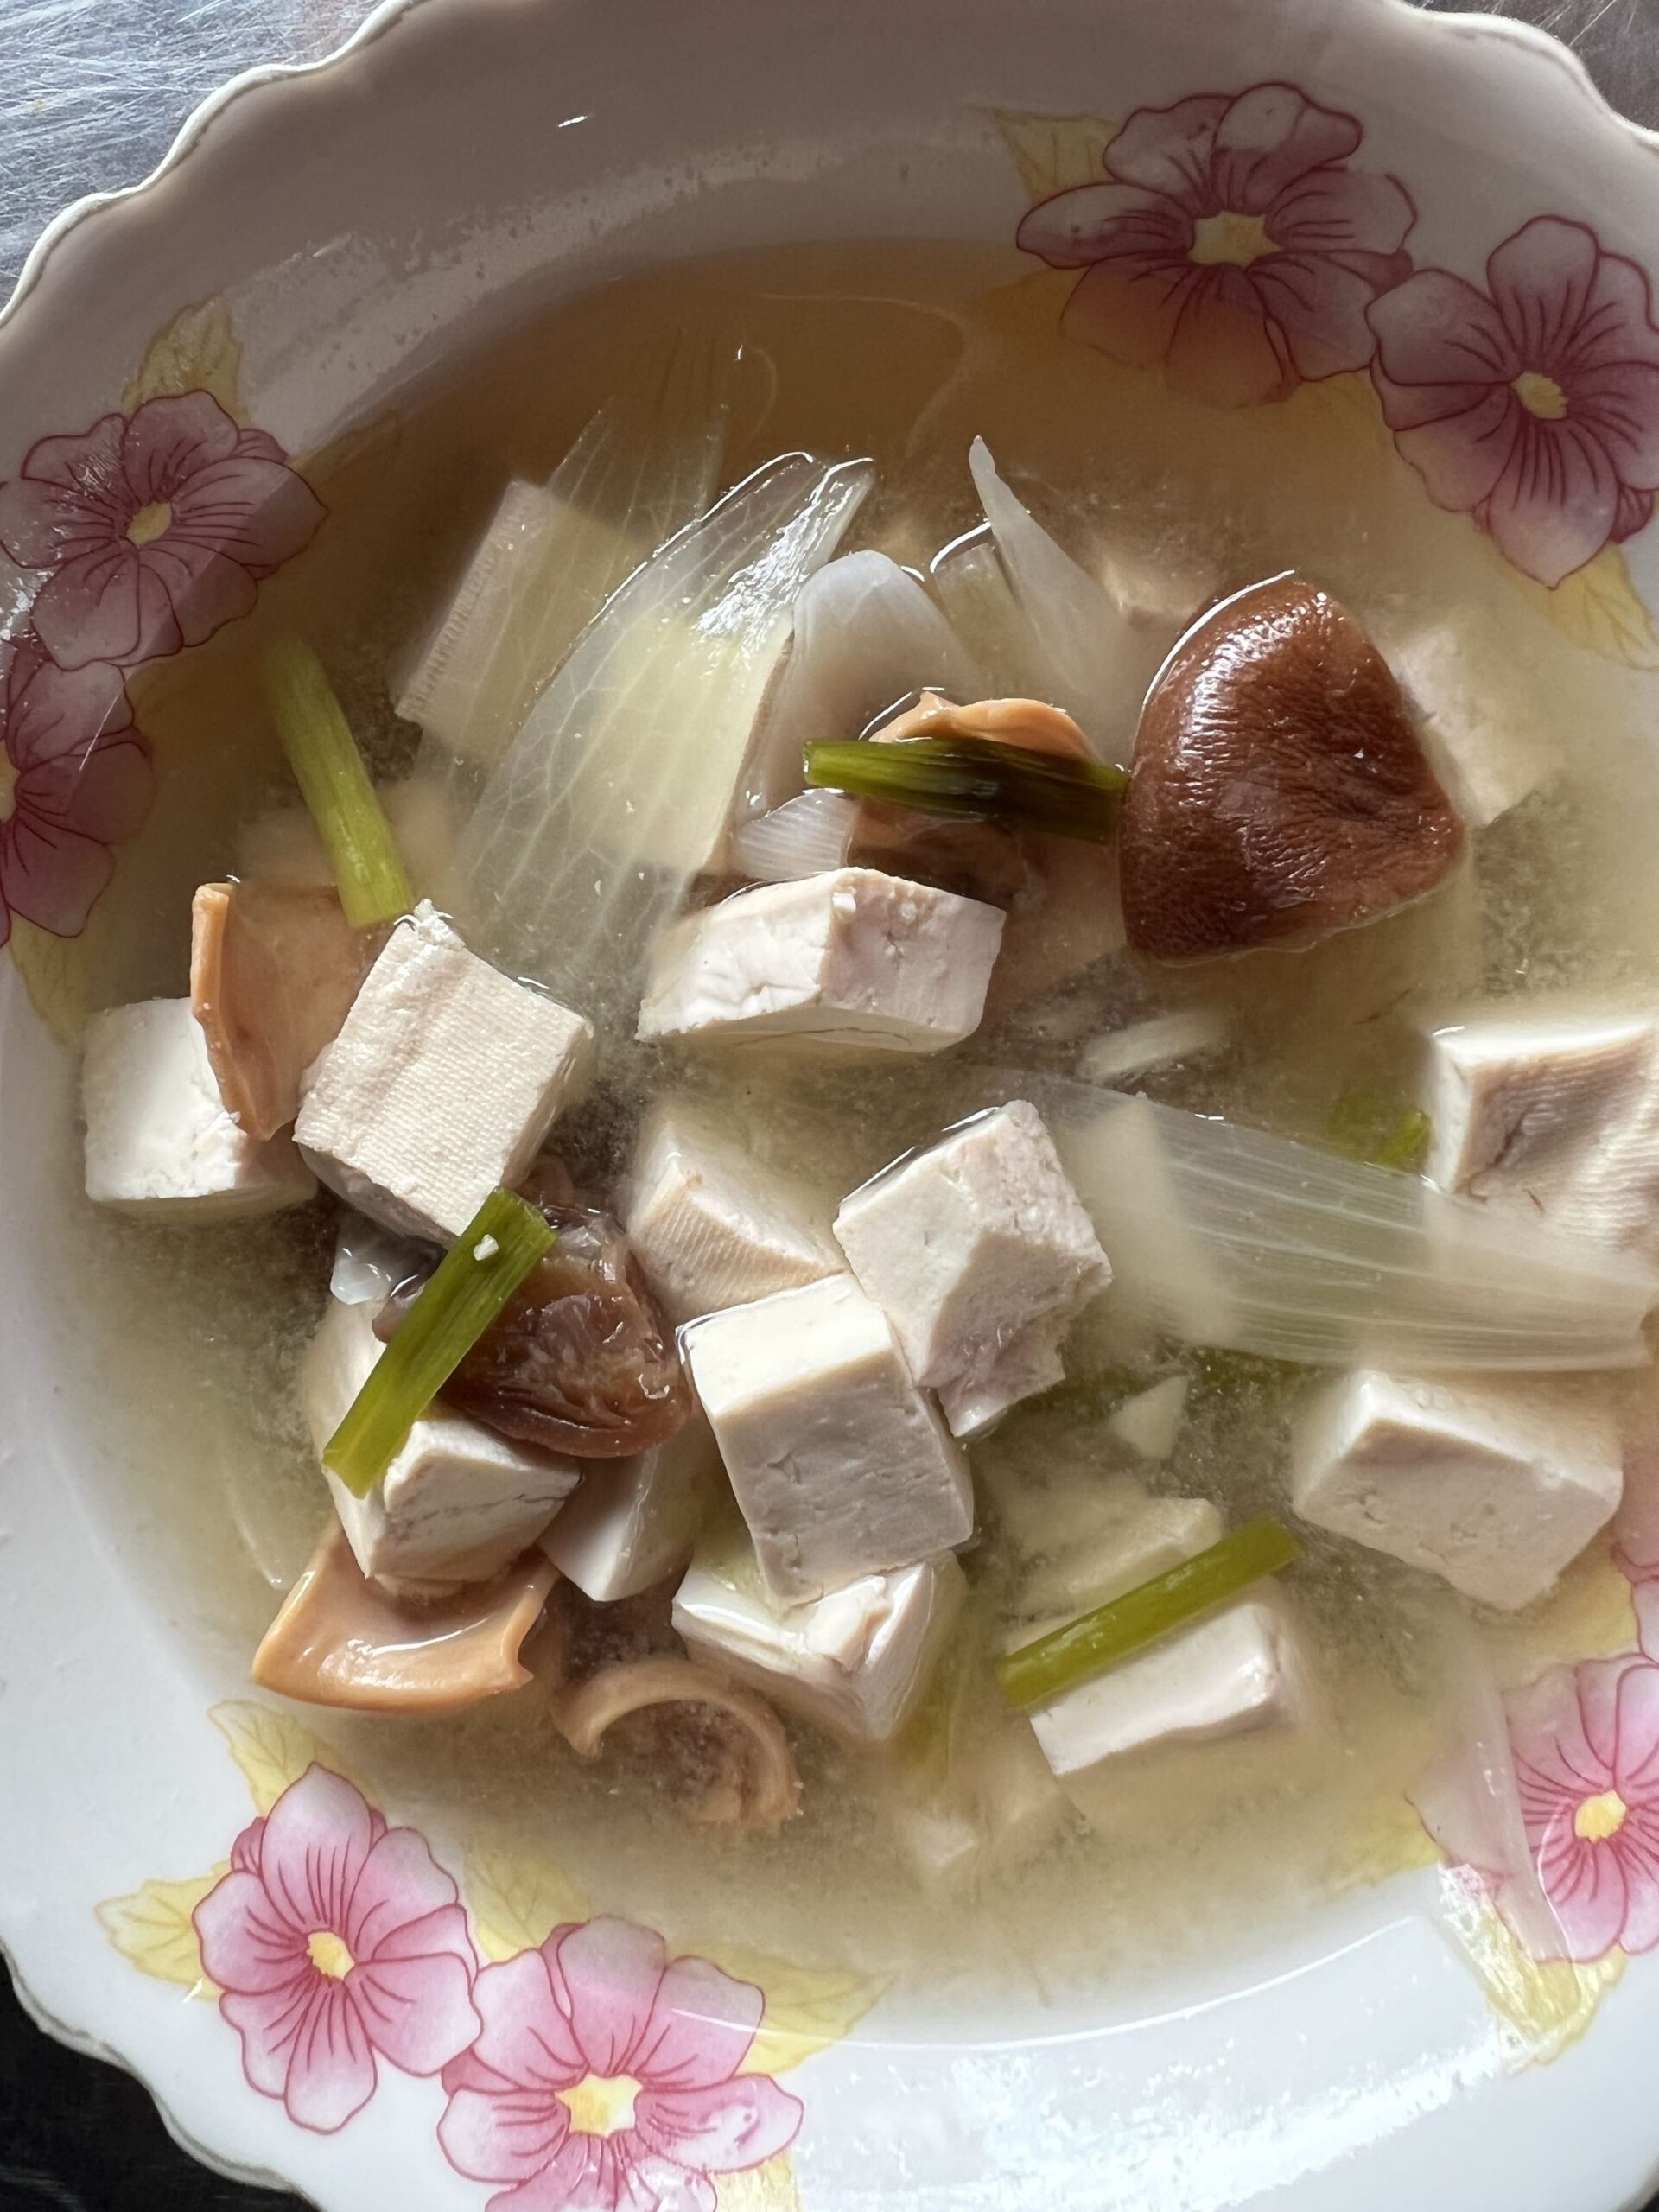 The vegetarian version of sour lime soup